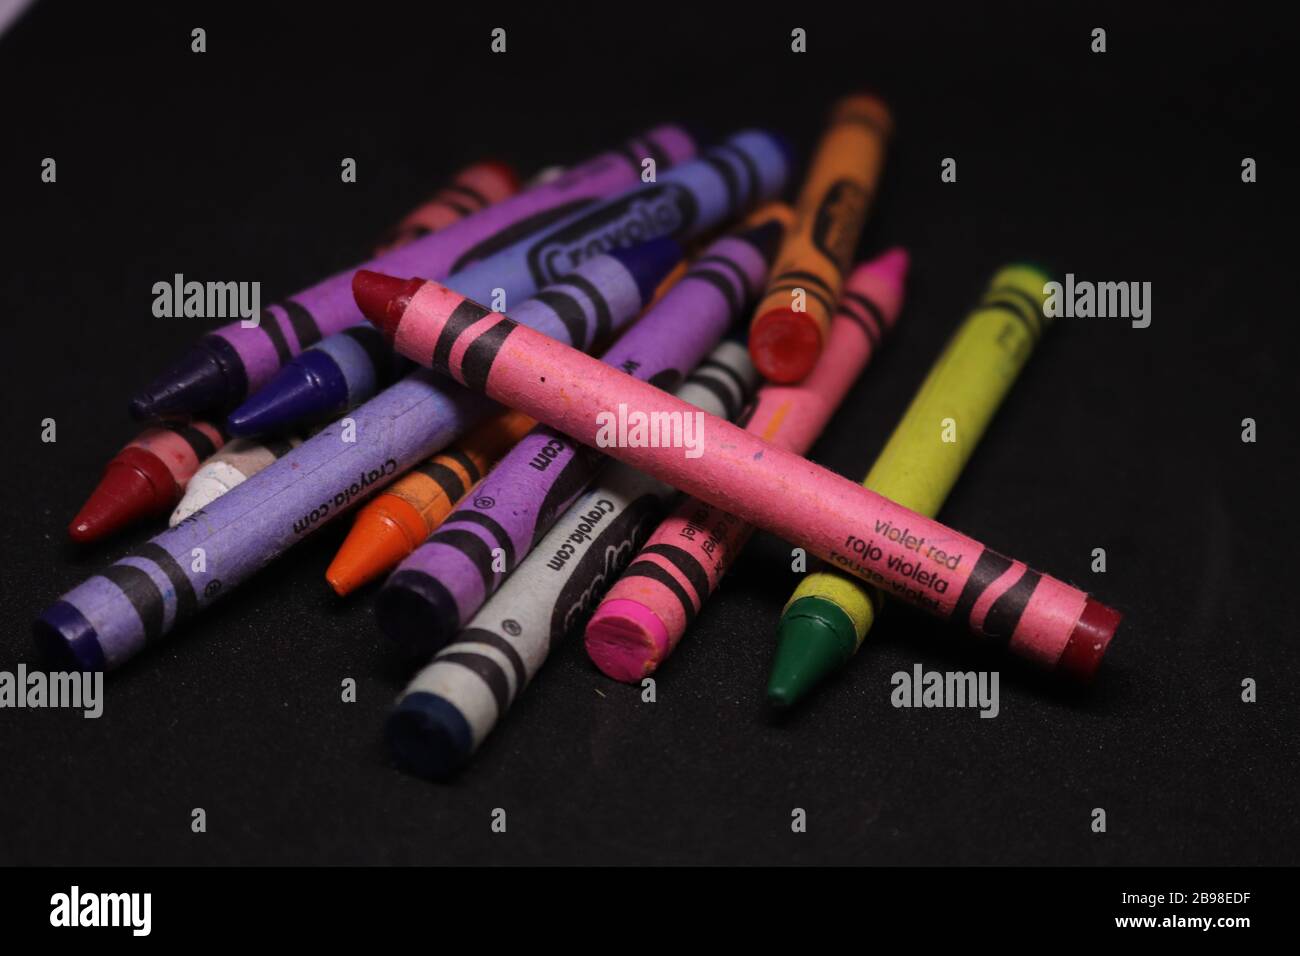 Crayons crayola Cut Out Stock Images & Pictures - Alamy